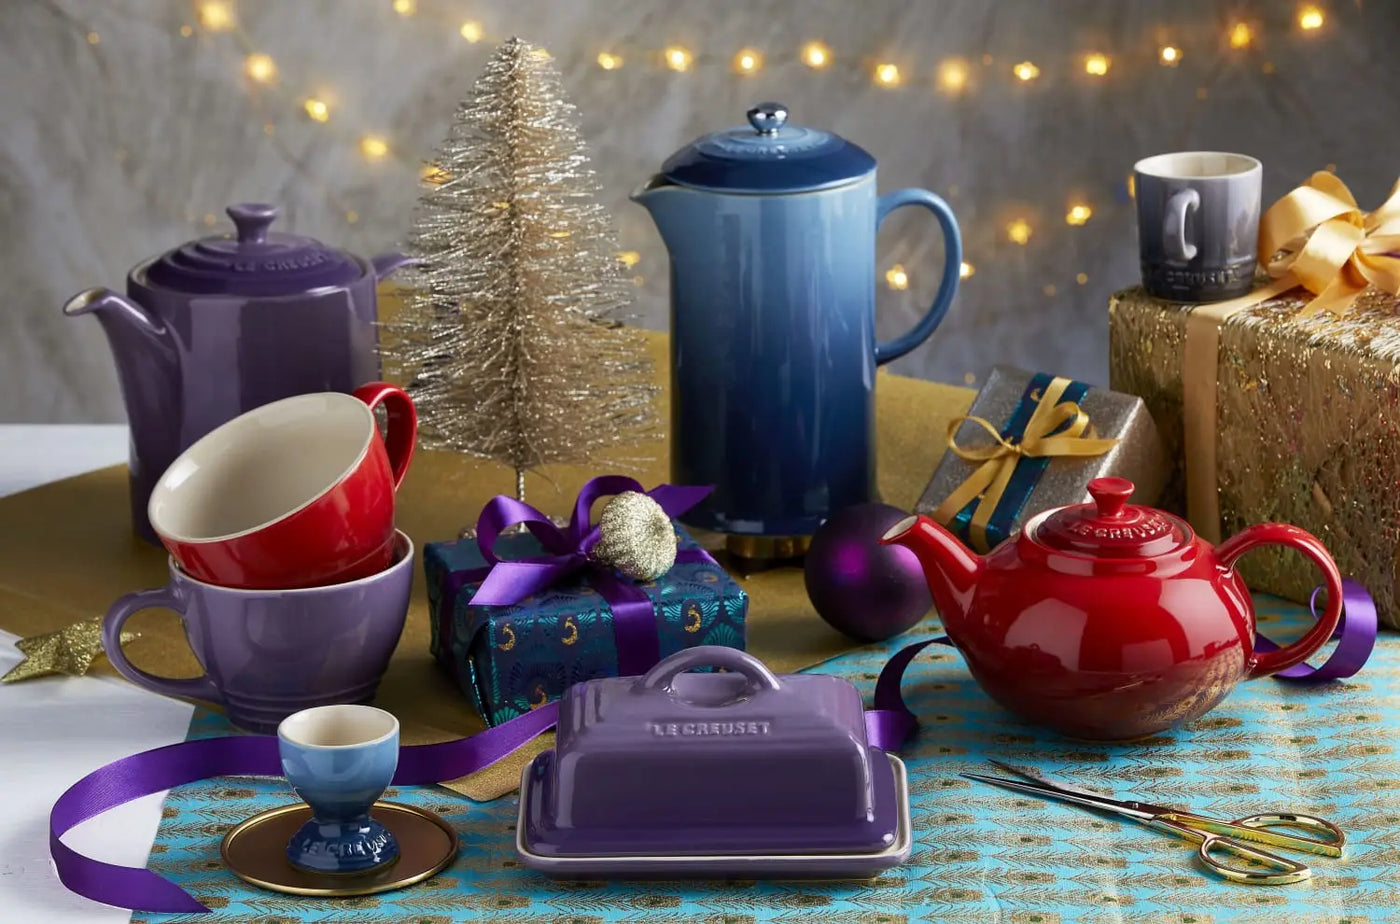 Le Creuset Gifts